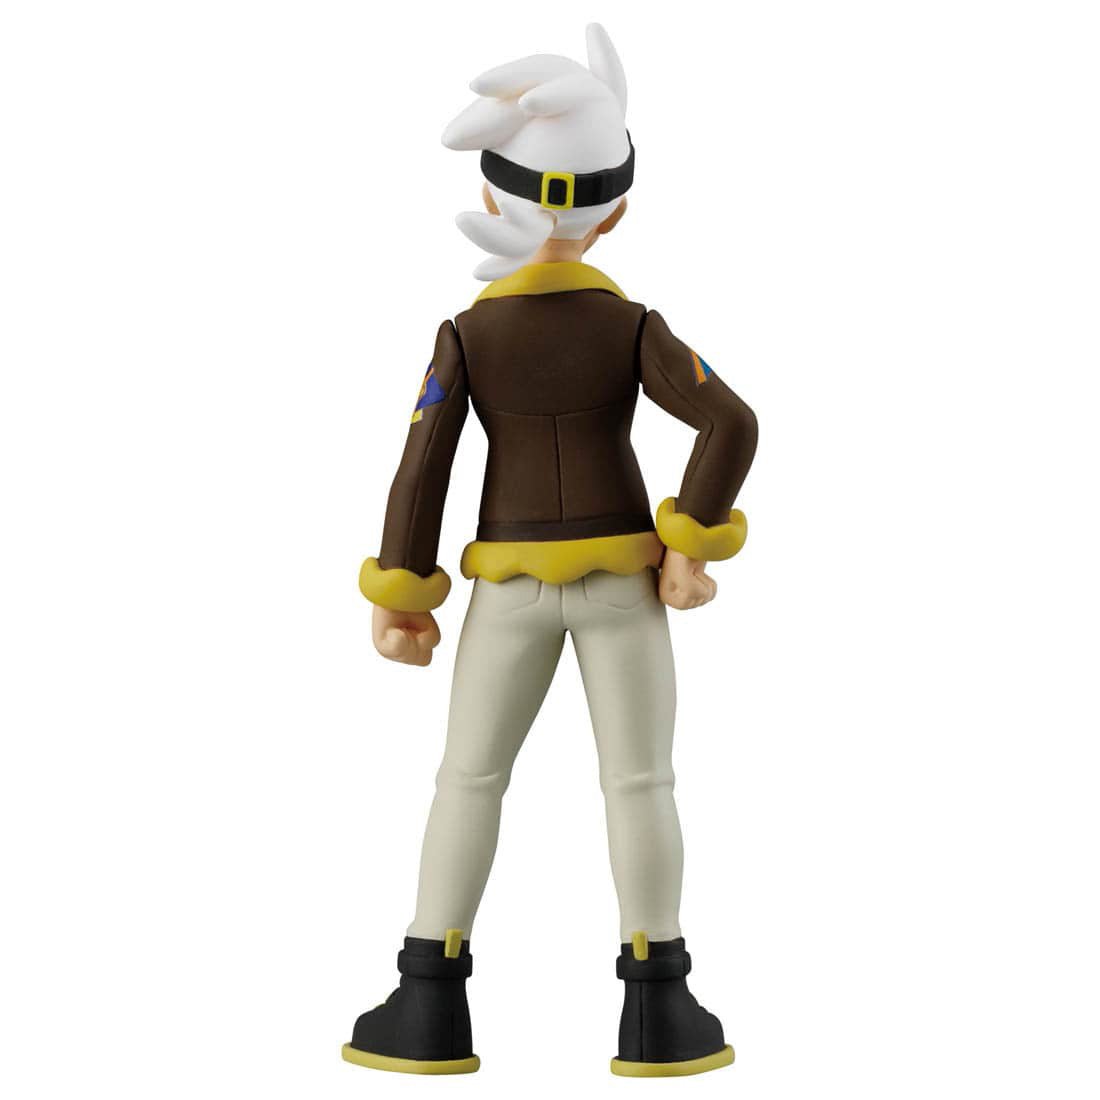 Takara Tomy - MonColle Trainer Collection Friede (Pokemon) - Good Game Anime